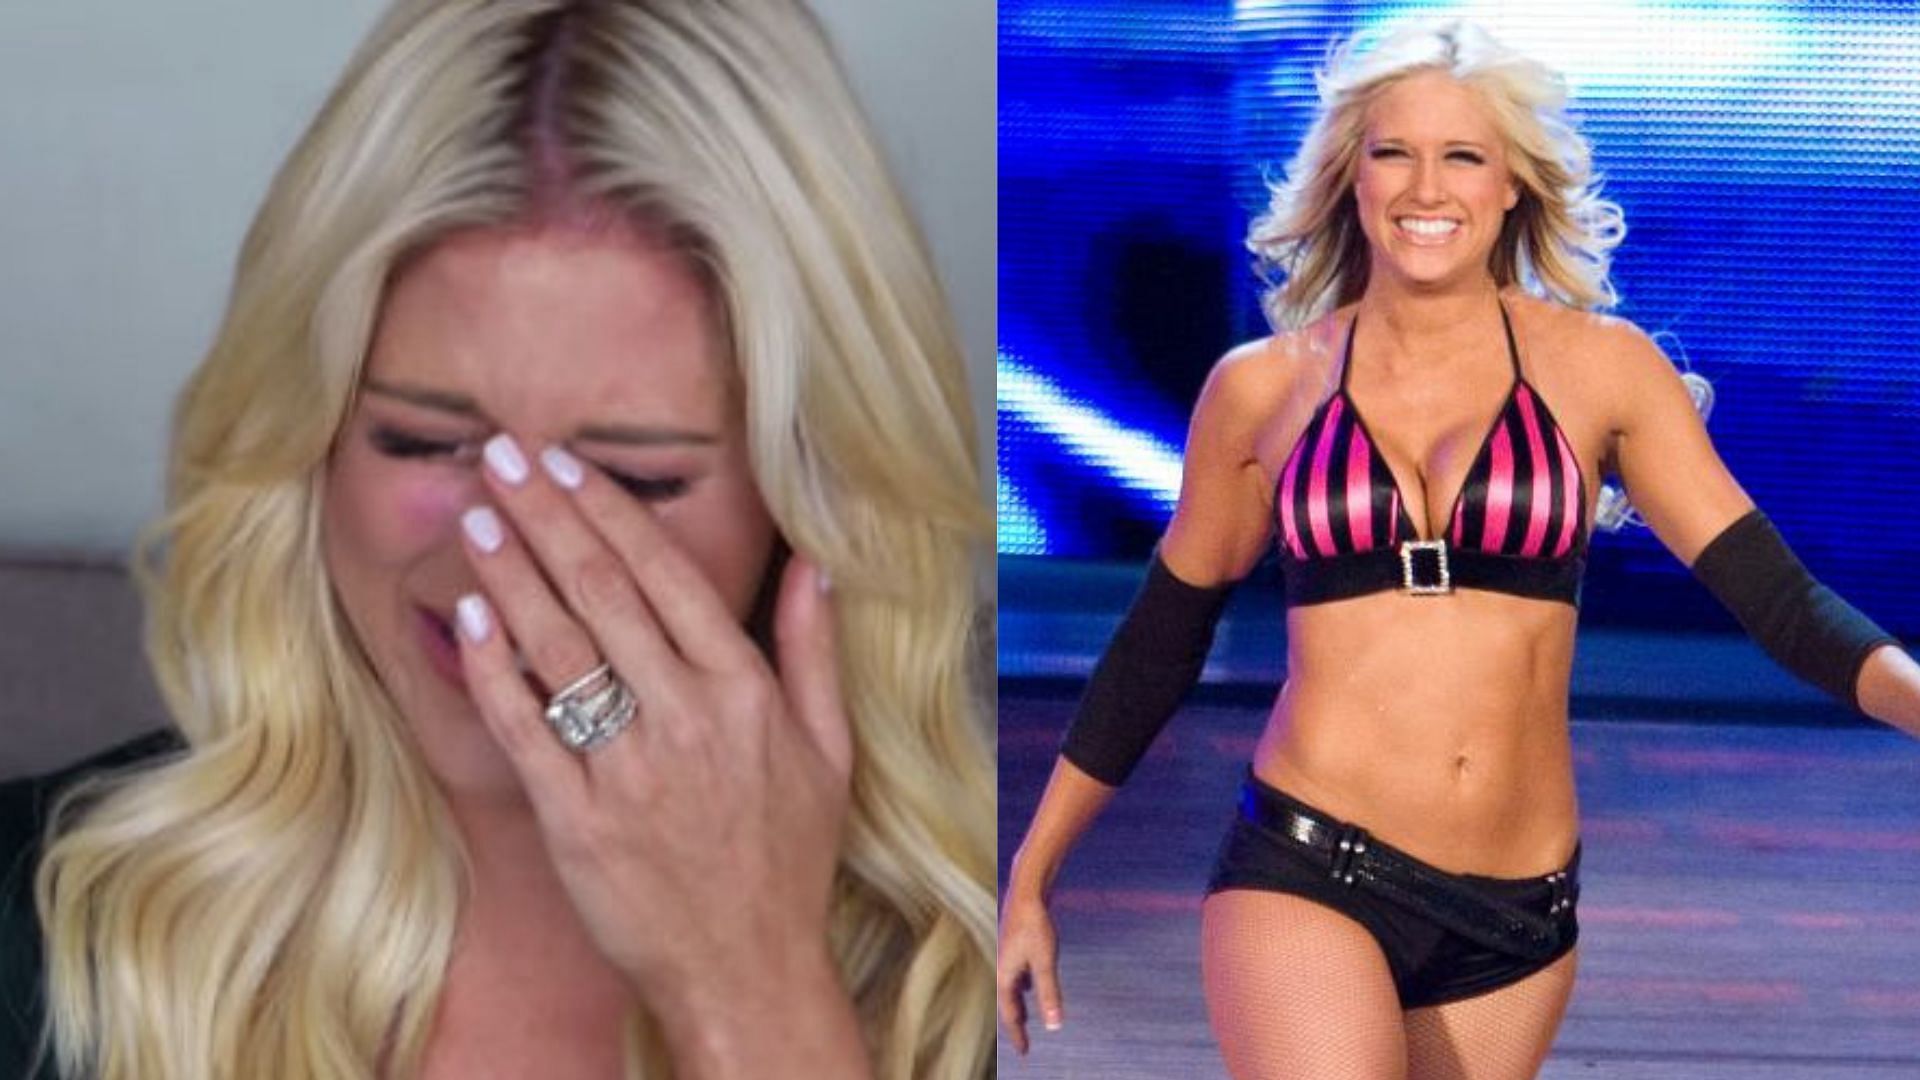 Former WWE star Kelly Kelly was confirmed to be in a relationship with two former colleagues